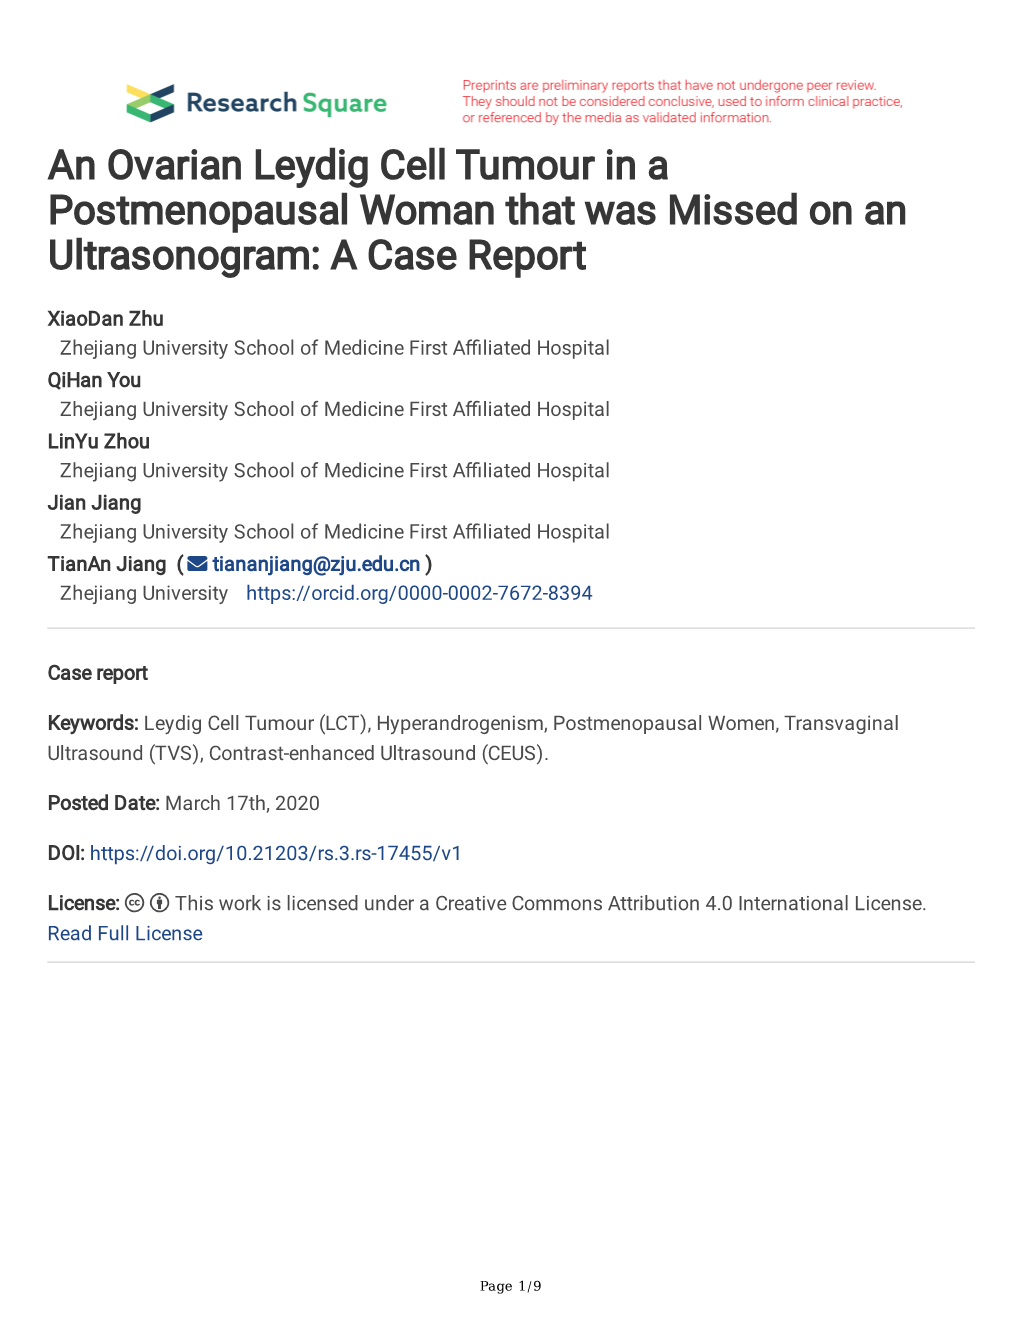 An Ovarian Leydig Cell Tumour in a Postmenopausal Woman That Was Missed on an Ultrasonogram: a Case Report